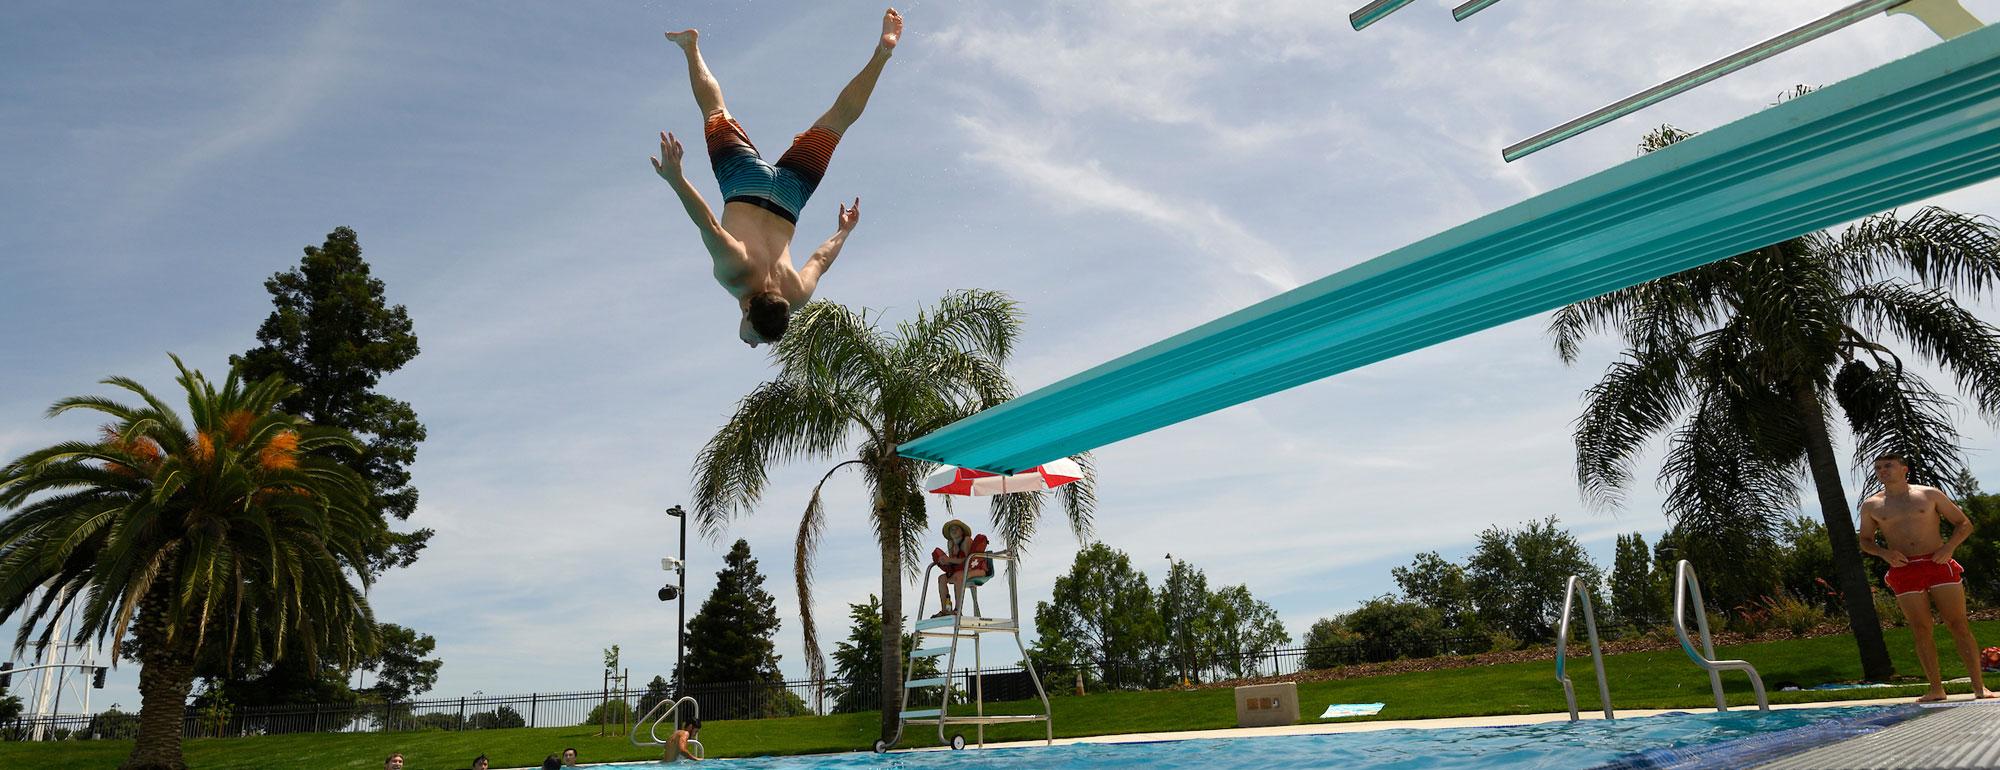 A student doing an acrobatic jump of of the diving board at the TV Recreation Pool